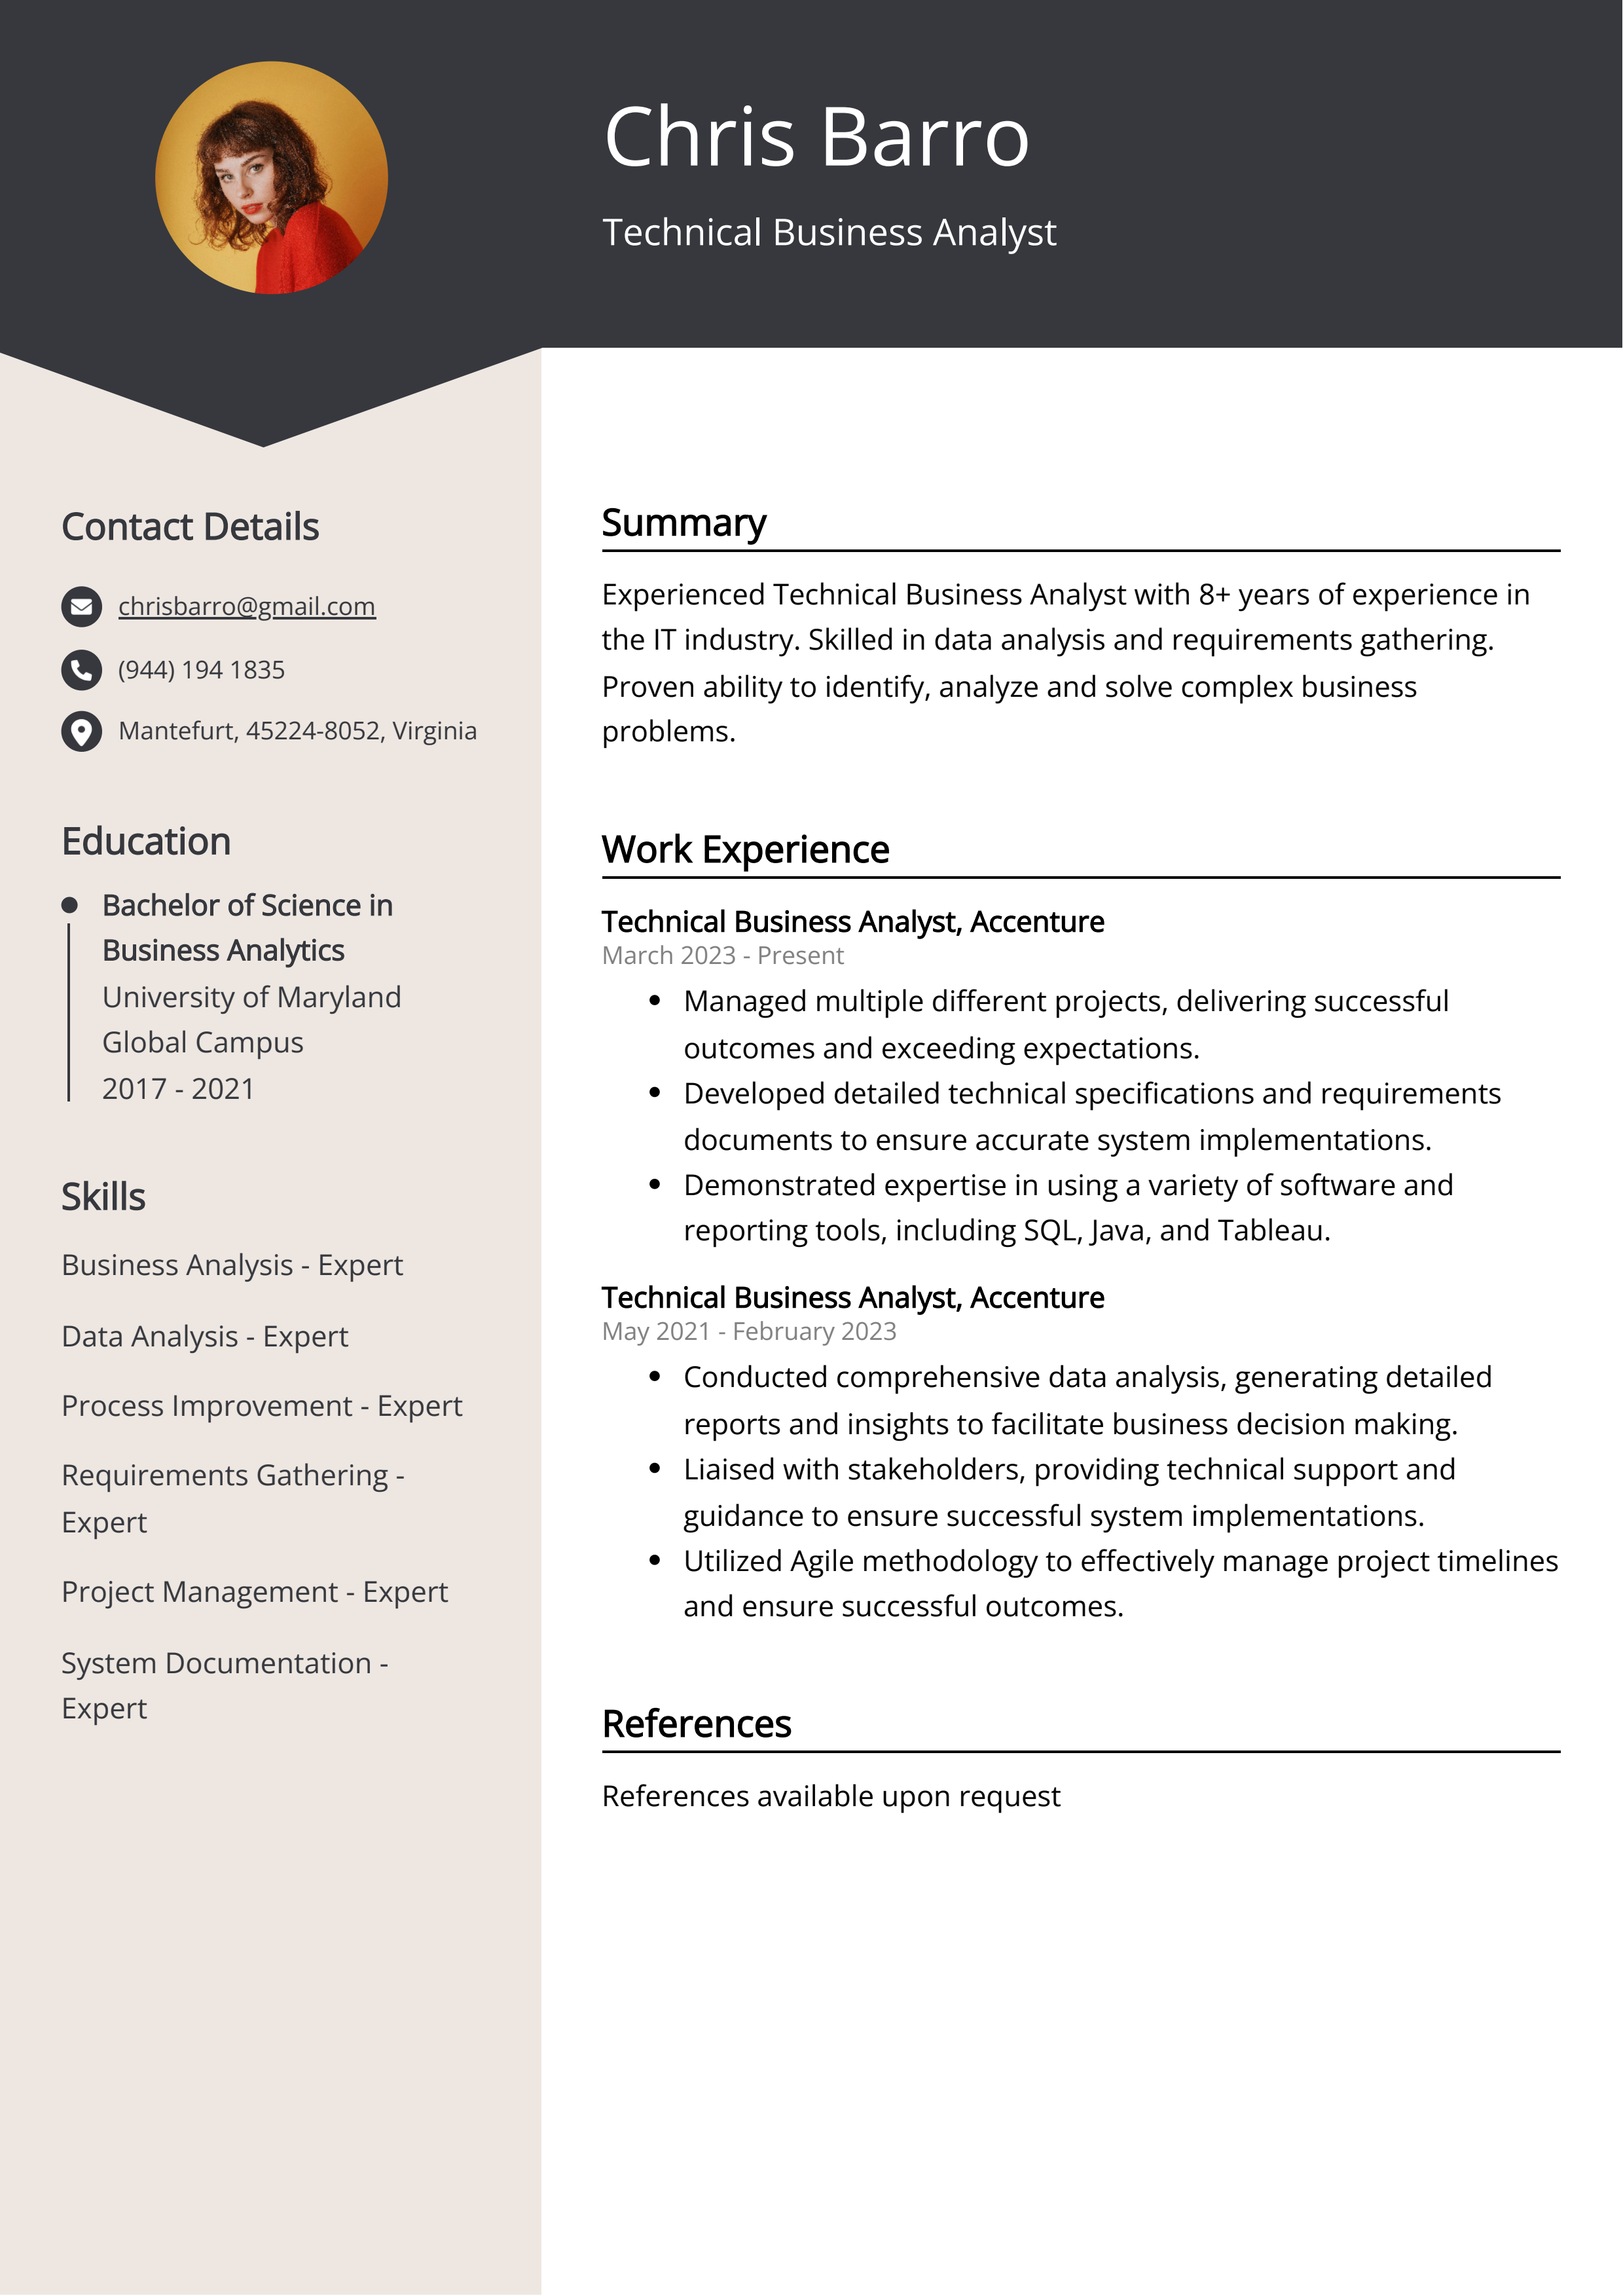 Technical Business Analyst CV Example